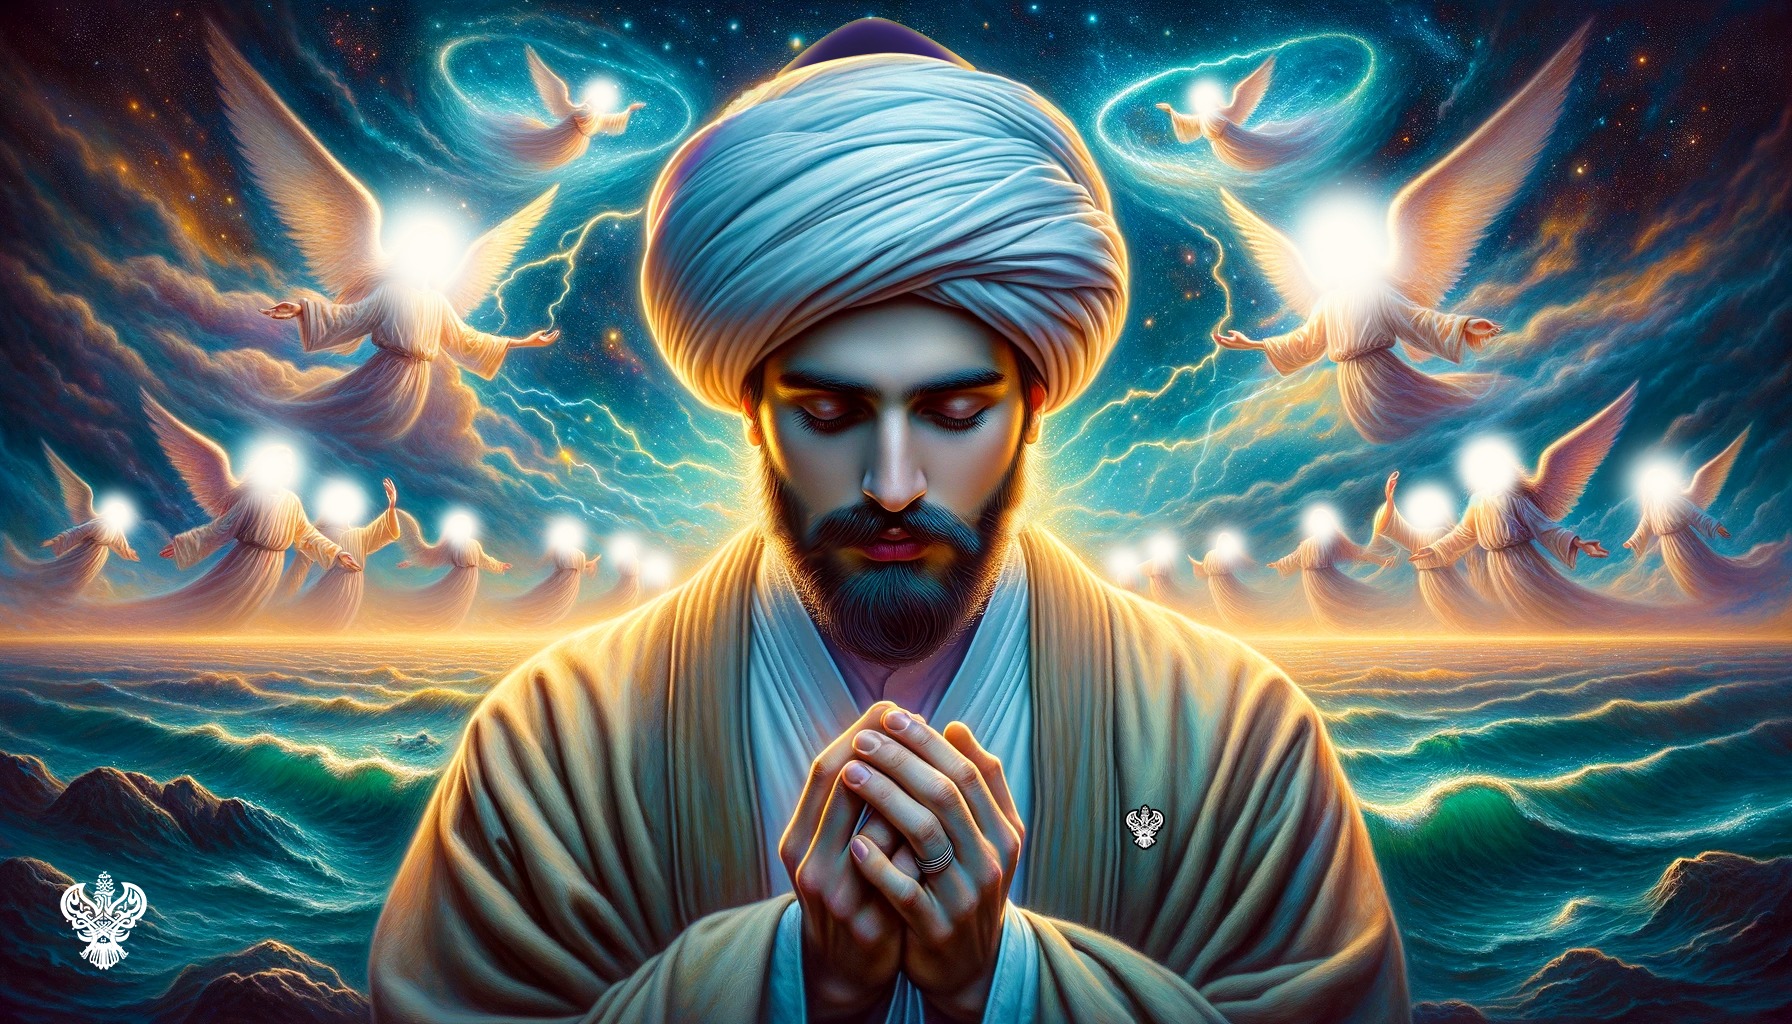 A sufi man praying with winged beings in an ocean of power